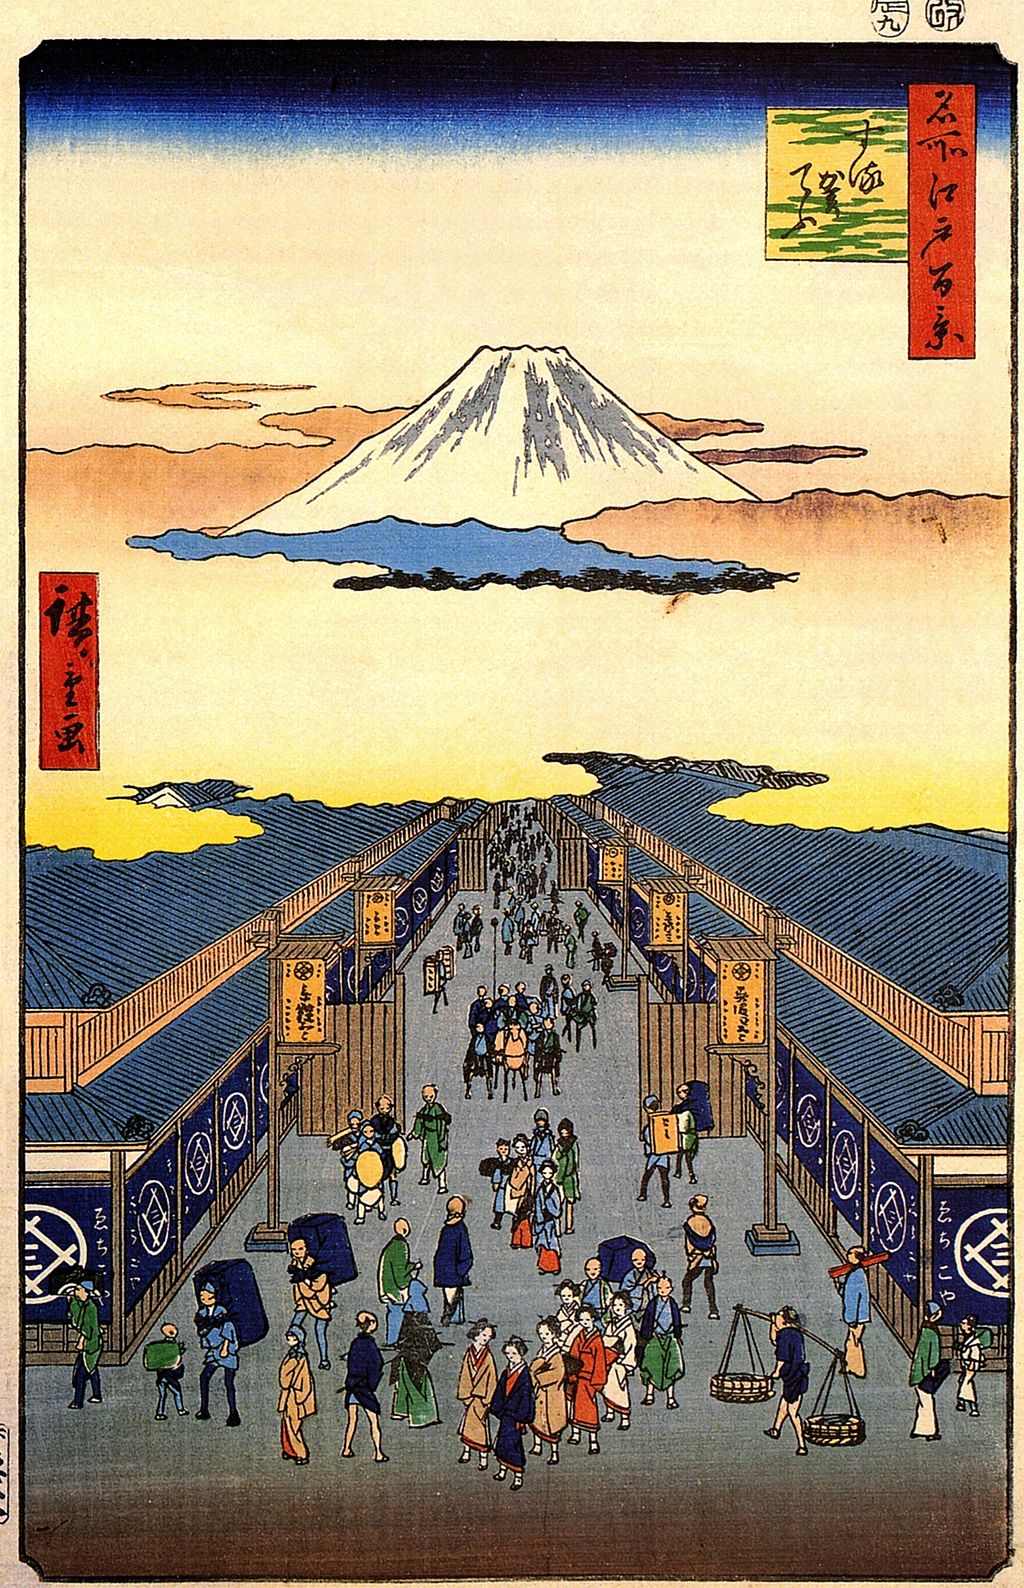 In this ukiyo-e print by Utagawa Hiroshige, one can see the area where the original Mitsukoshi fabric store is (left side of the street)